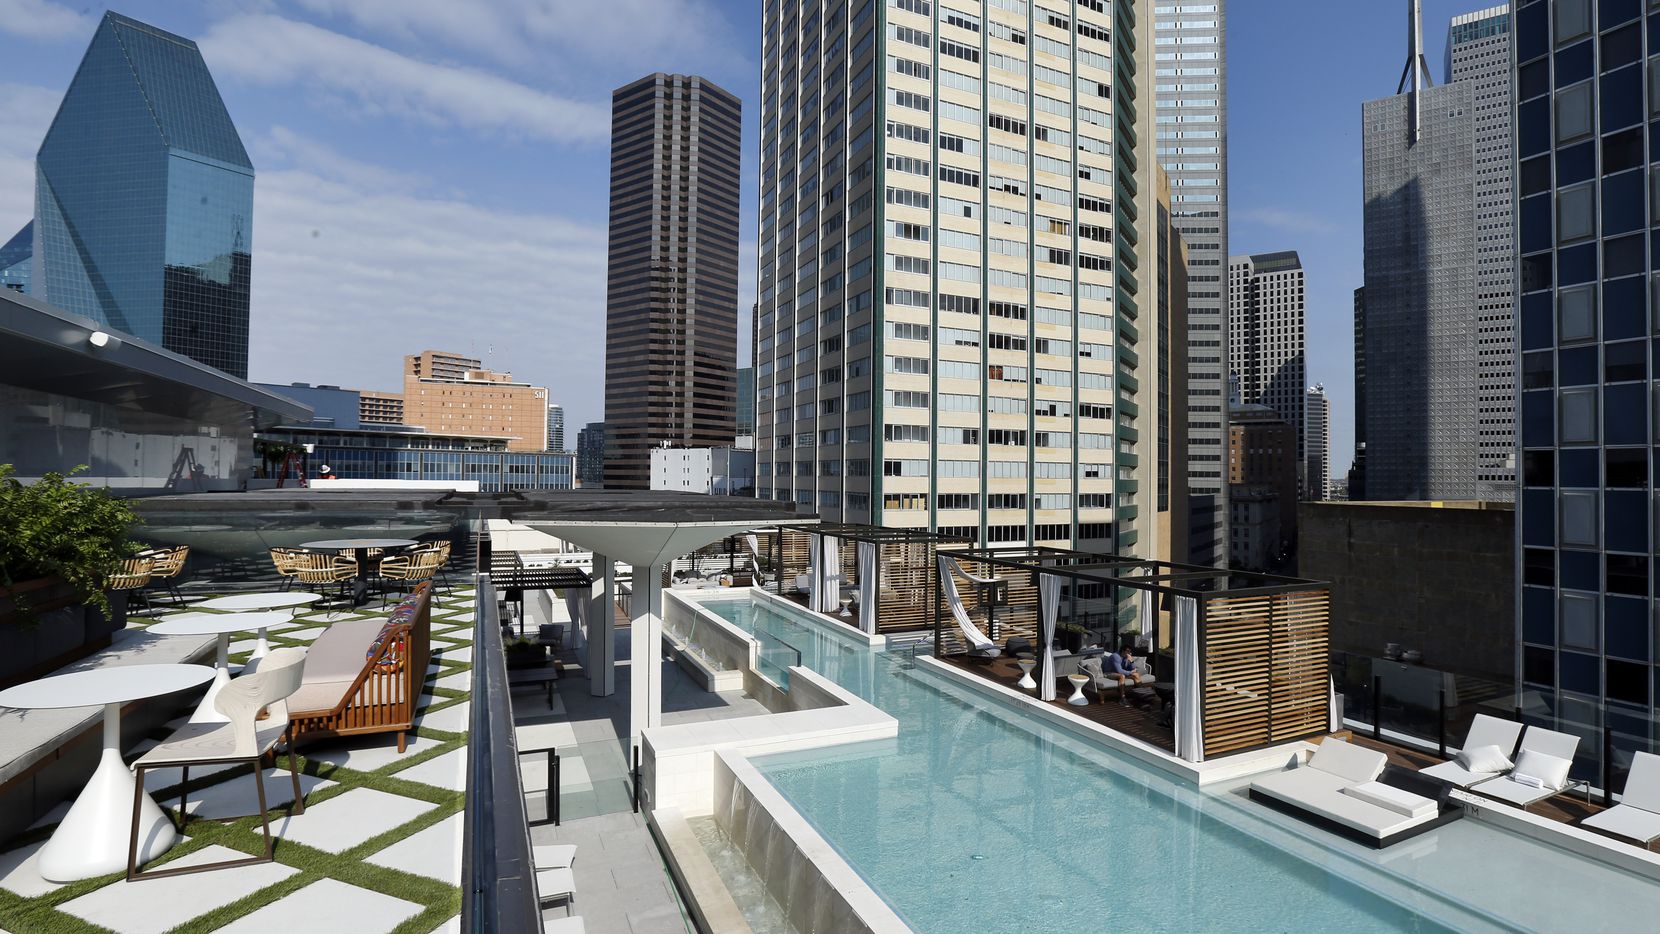 Fountain Place building (left) is seen from the the bar and pool deck areas of The National,...